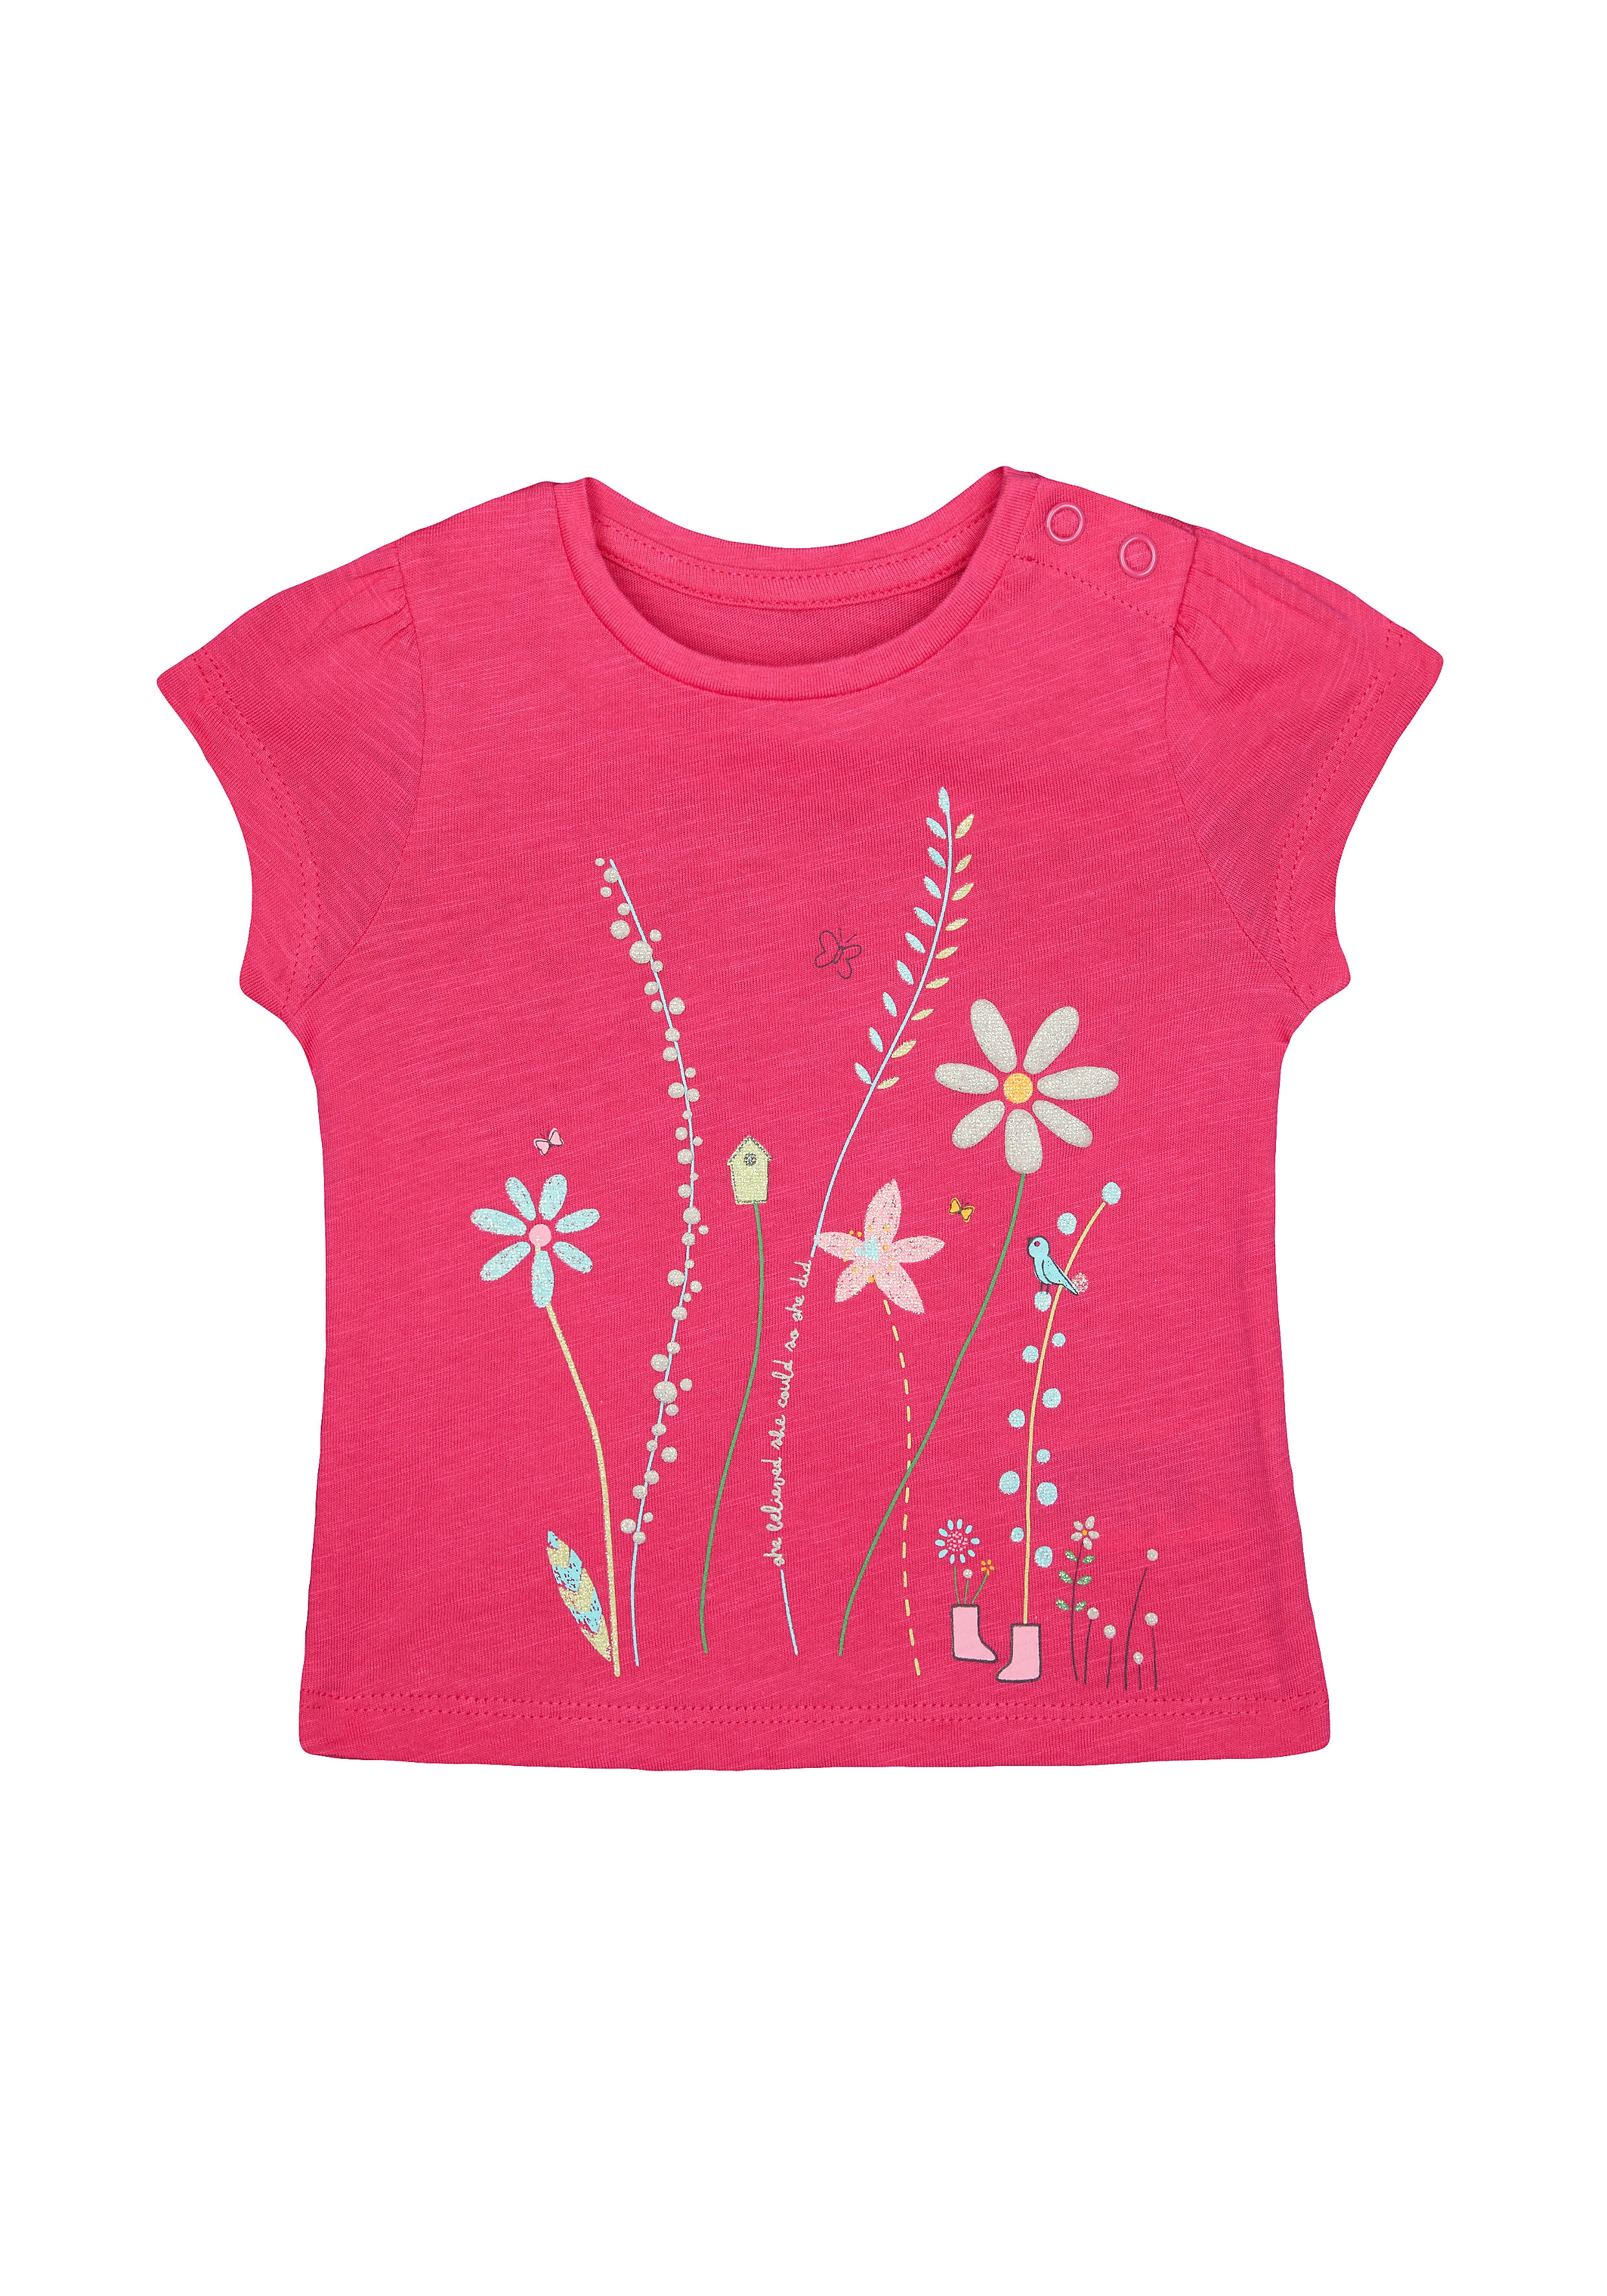 Mothercare | Girls Half Sleeves T-Shirt Glitter Floral Print - Pink 0